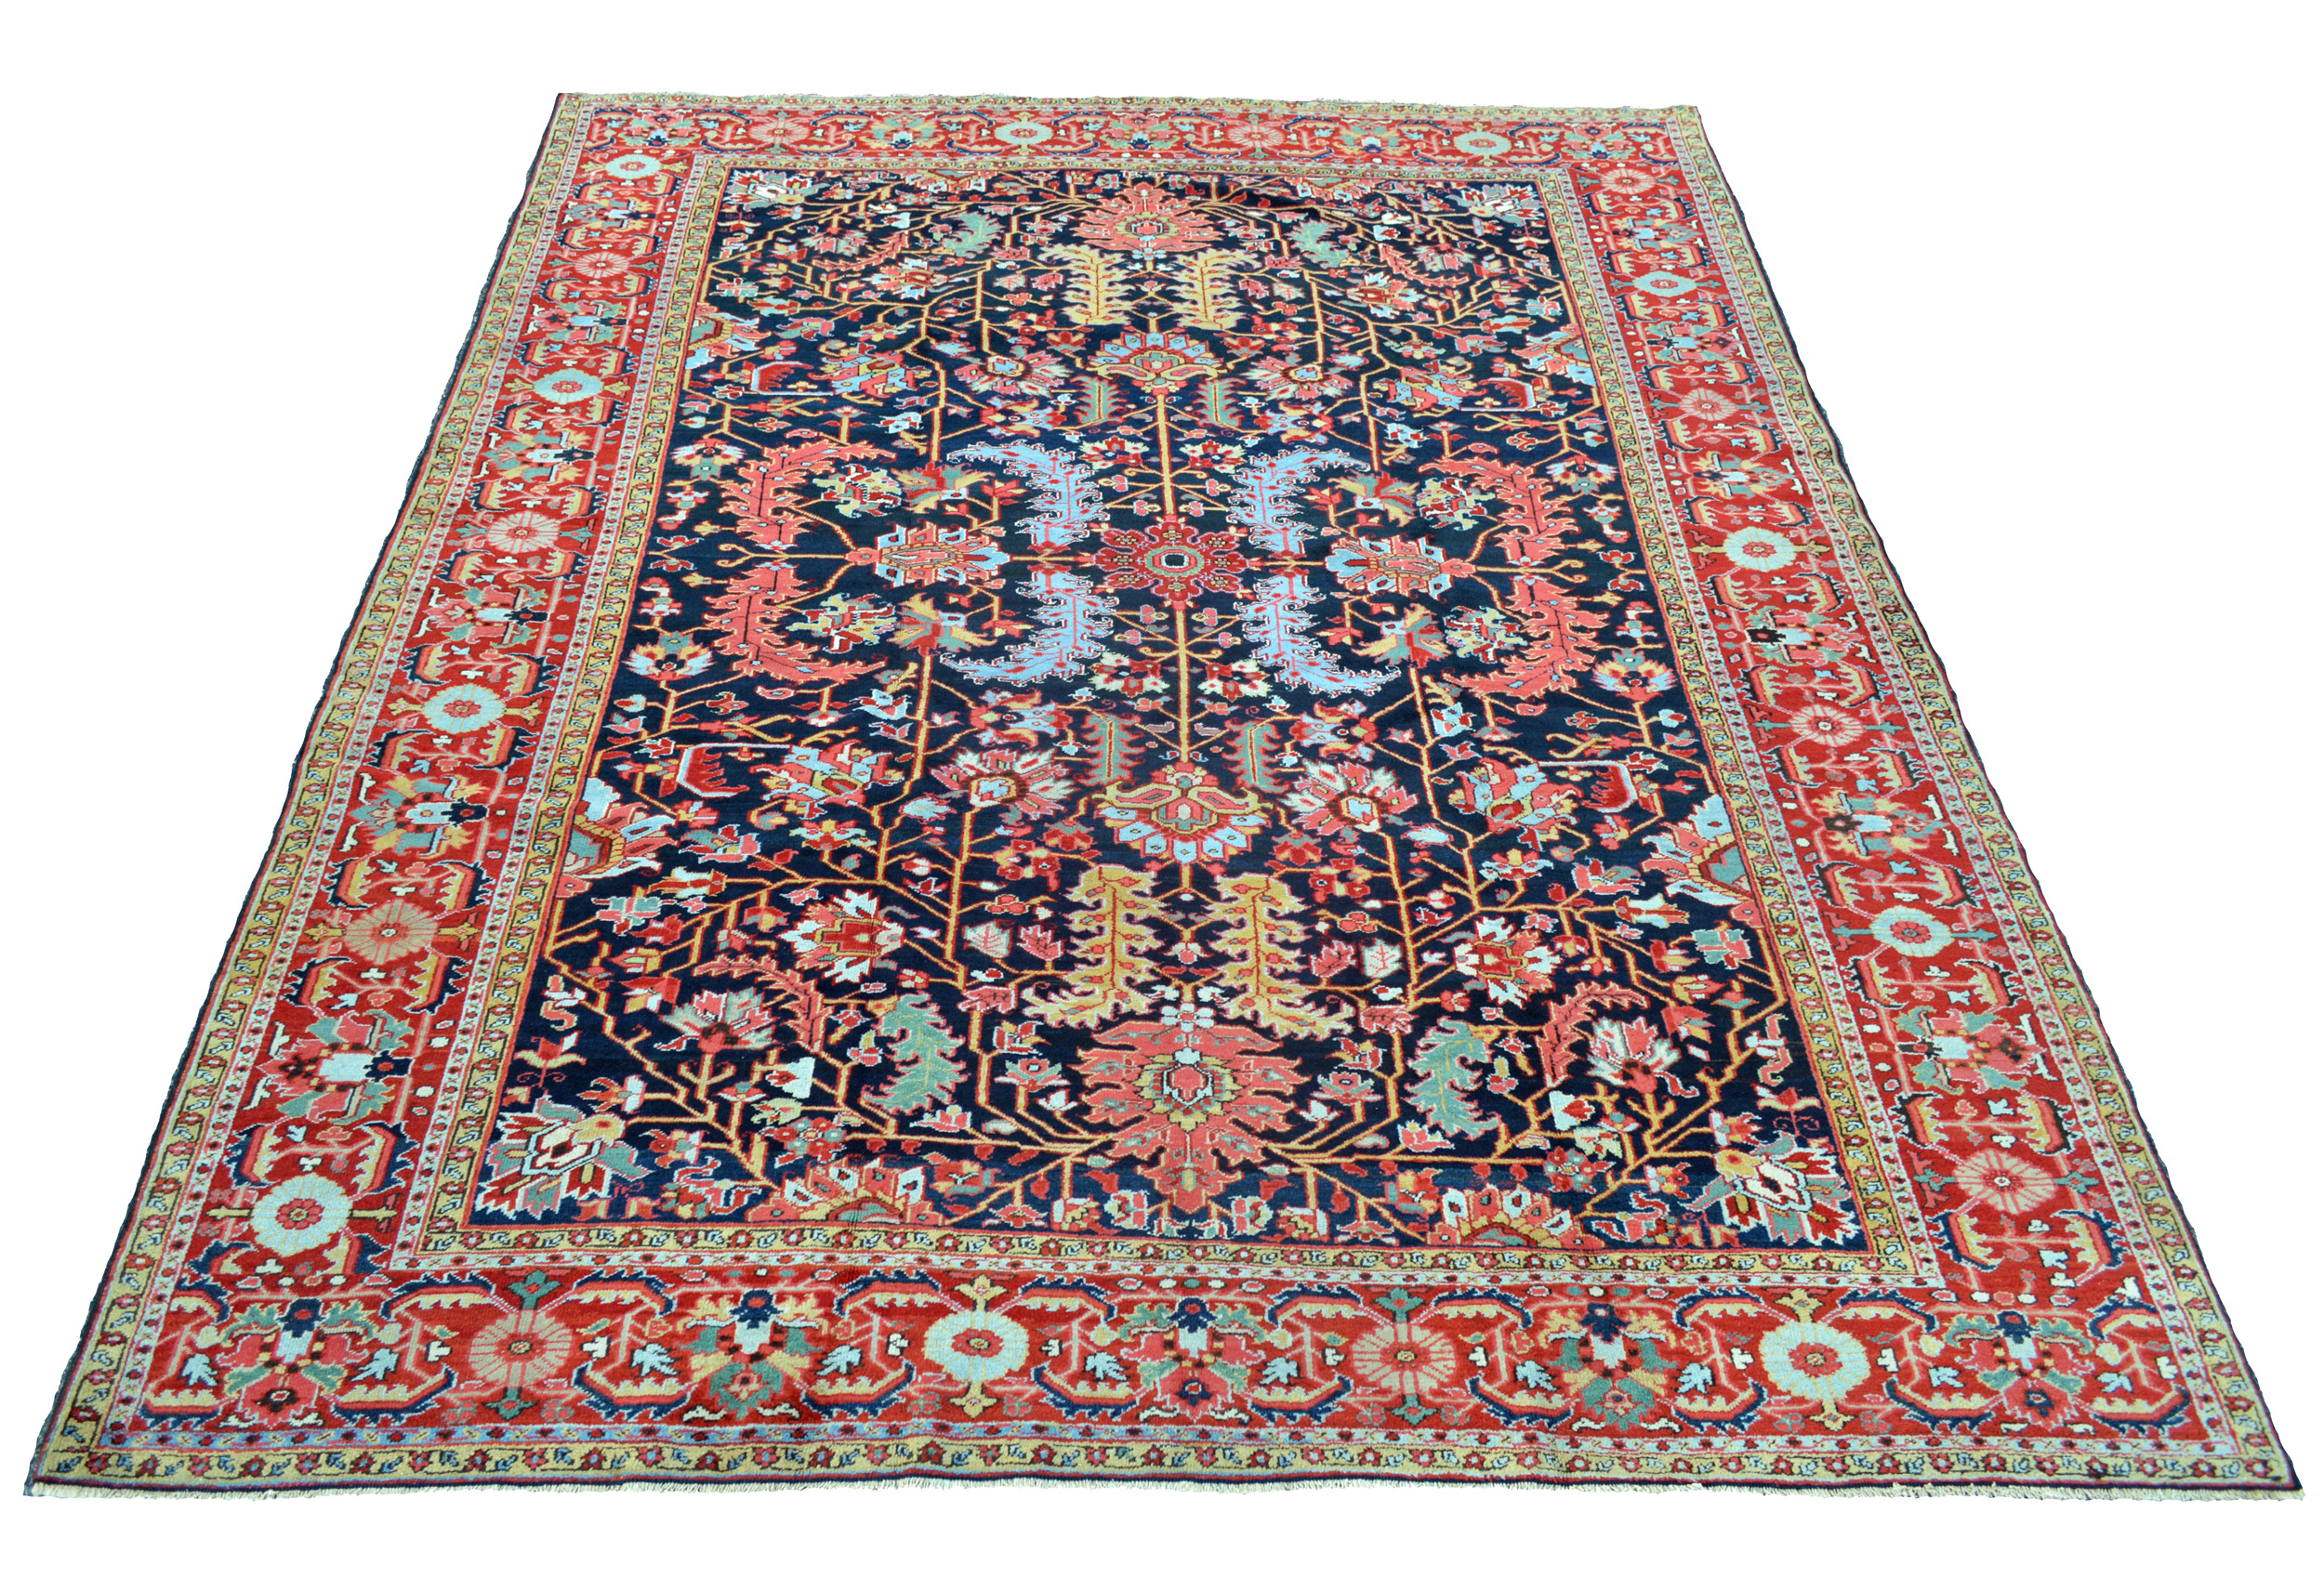 Antique Heriz carpet with navy field and all-over design, northwest Persia, circa 190 - Douglas Stock Gallery, antique Oriental rugs Boston,MA area, antique rugs New England